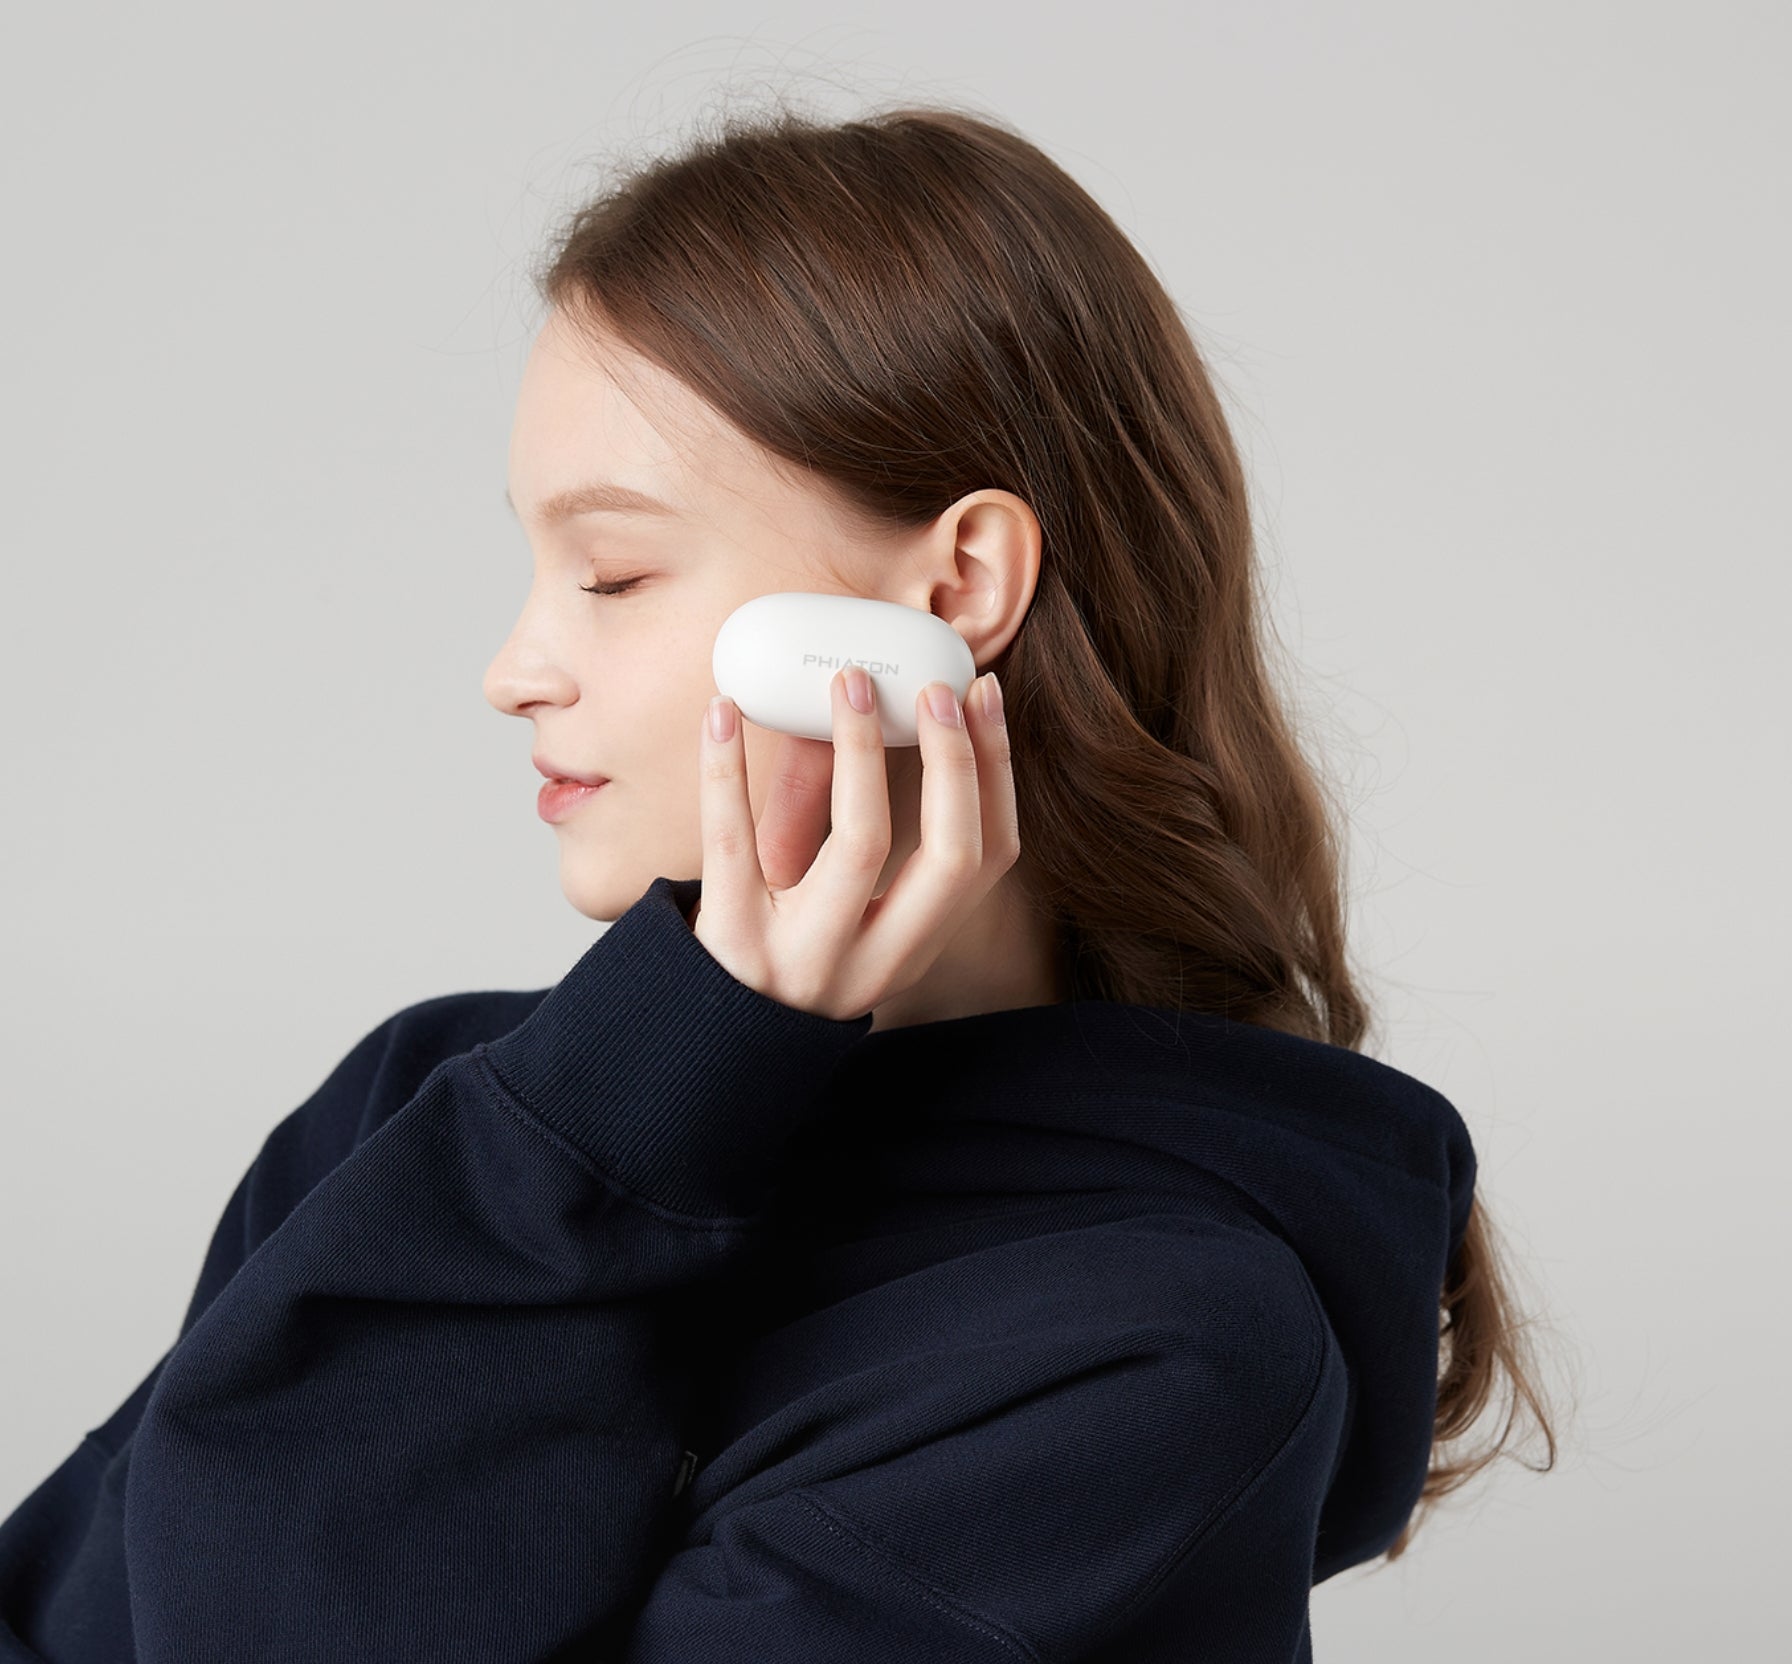 young woman holding earphone case up to ear